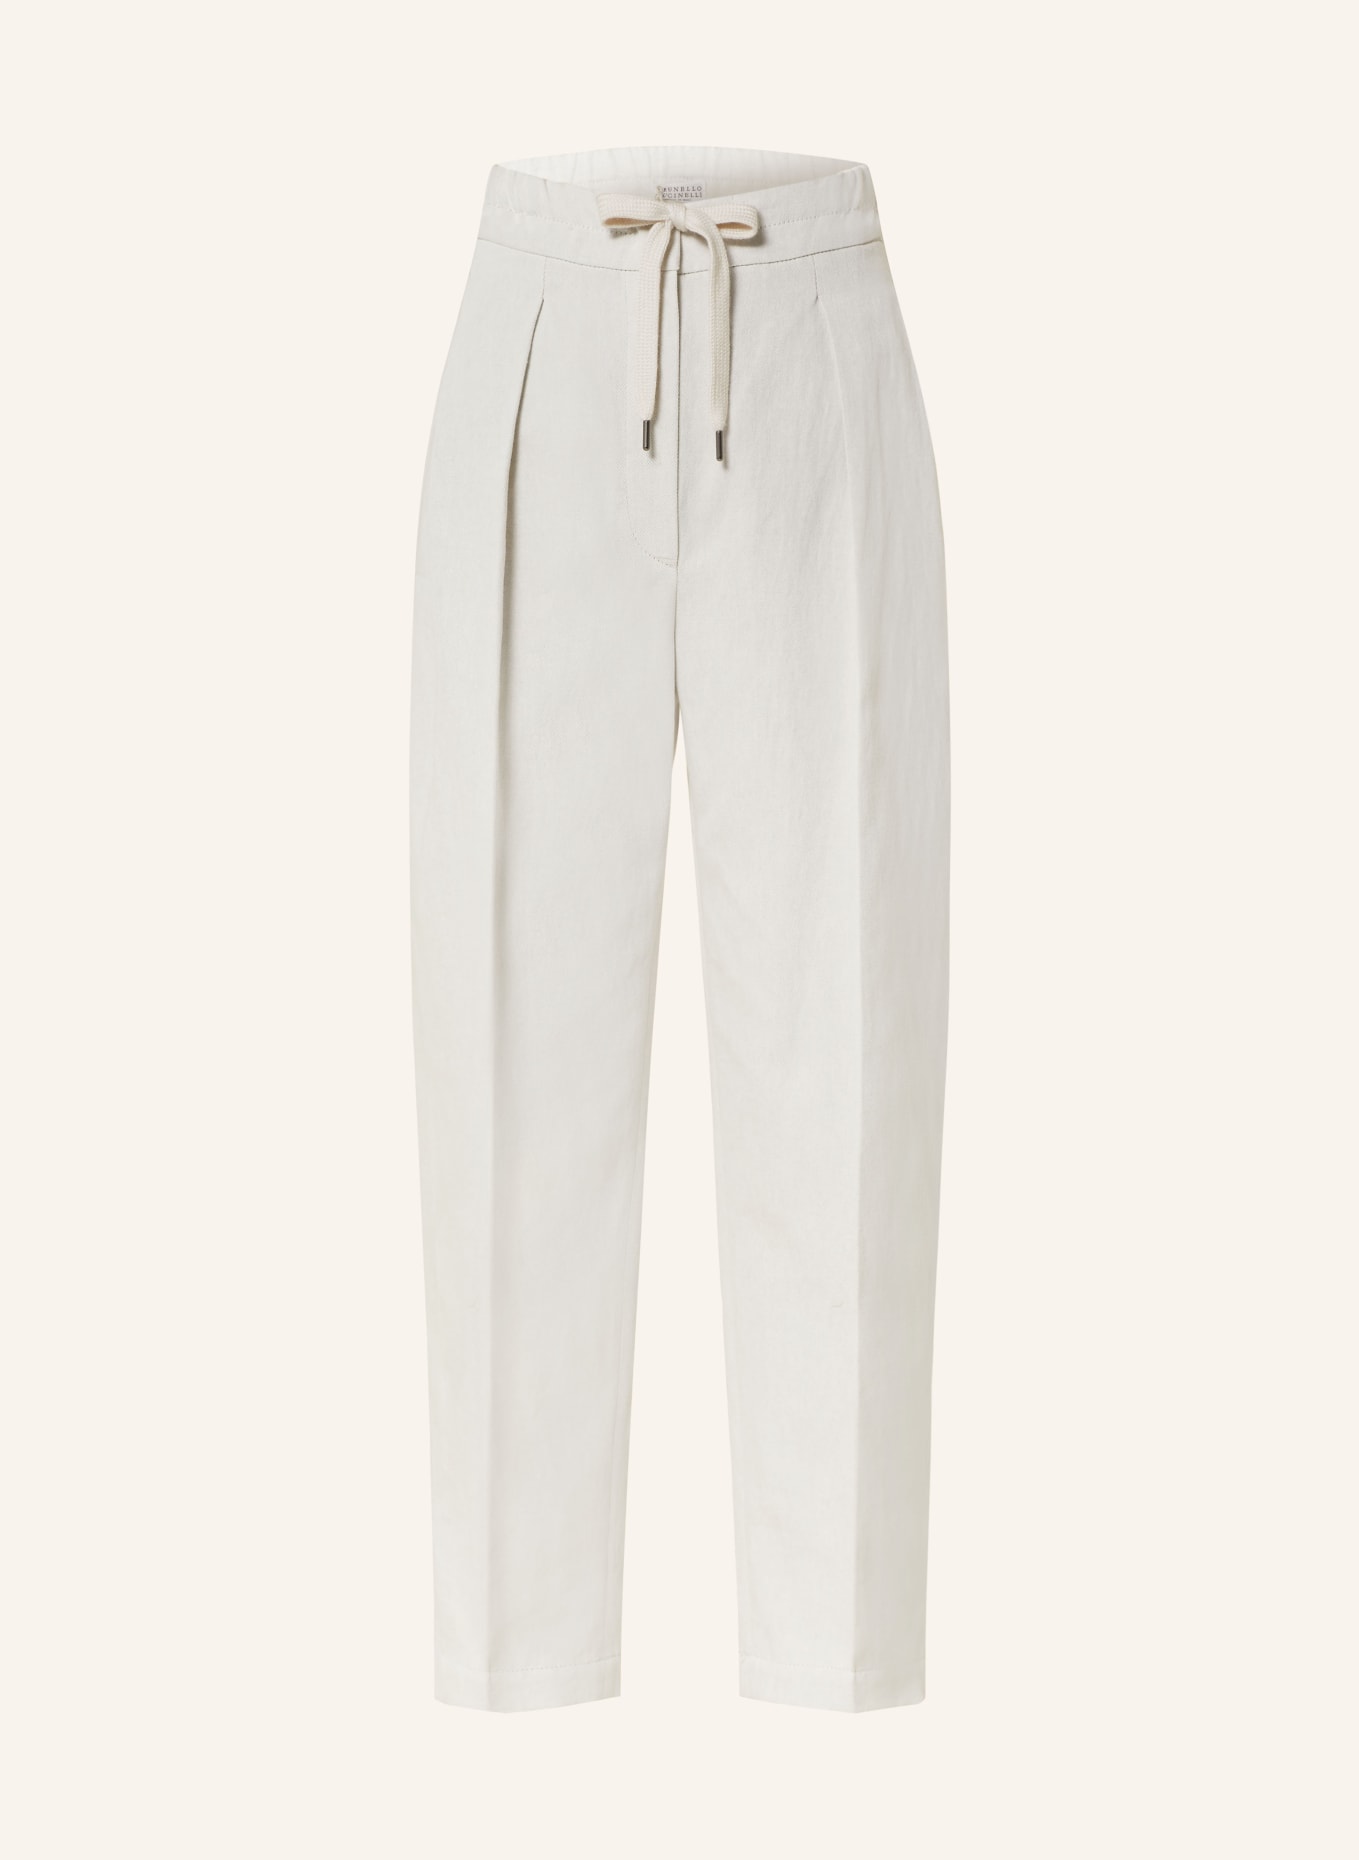 BRUNELLO CUCINELLI Pants in jogger style, Color: LIGHT GRAY (Image 1)